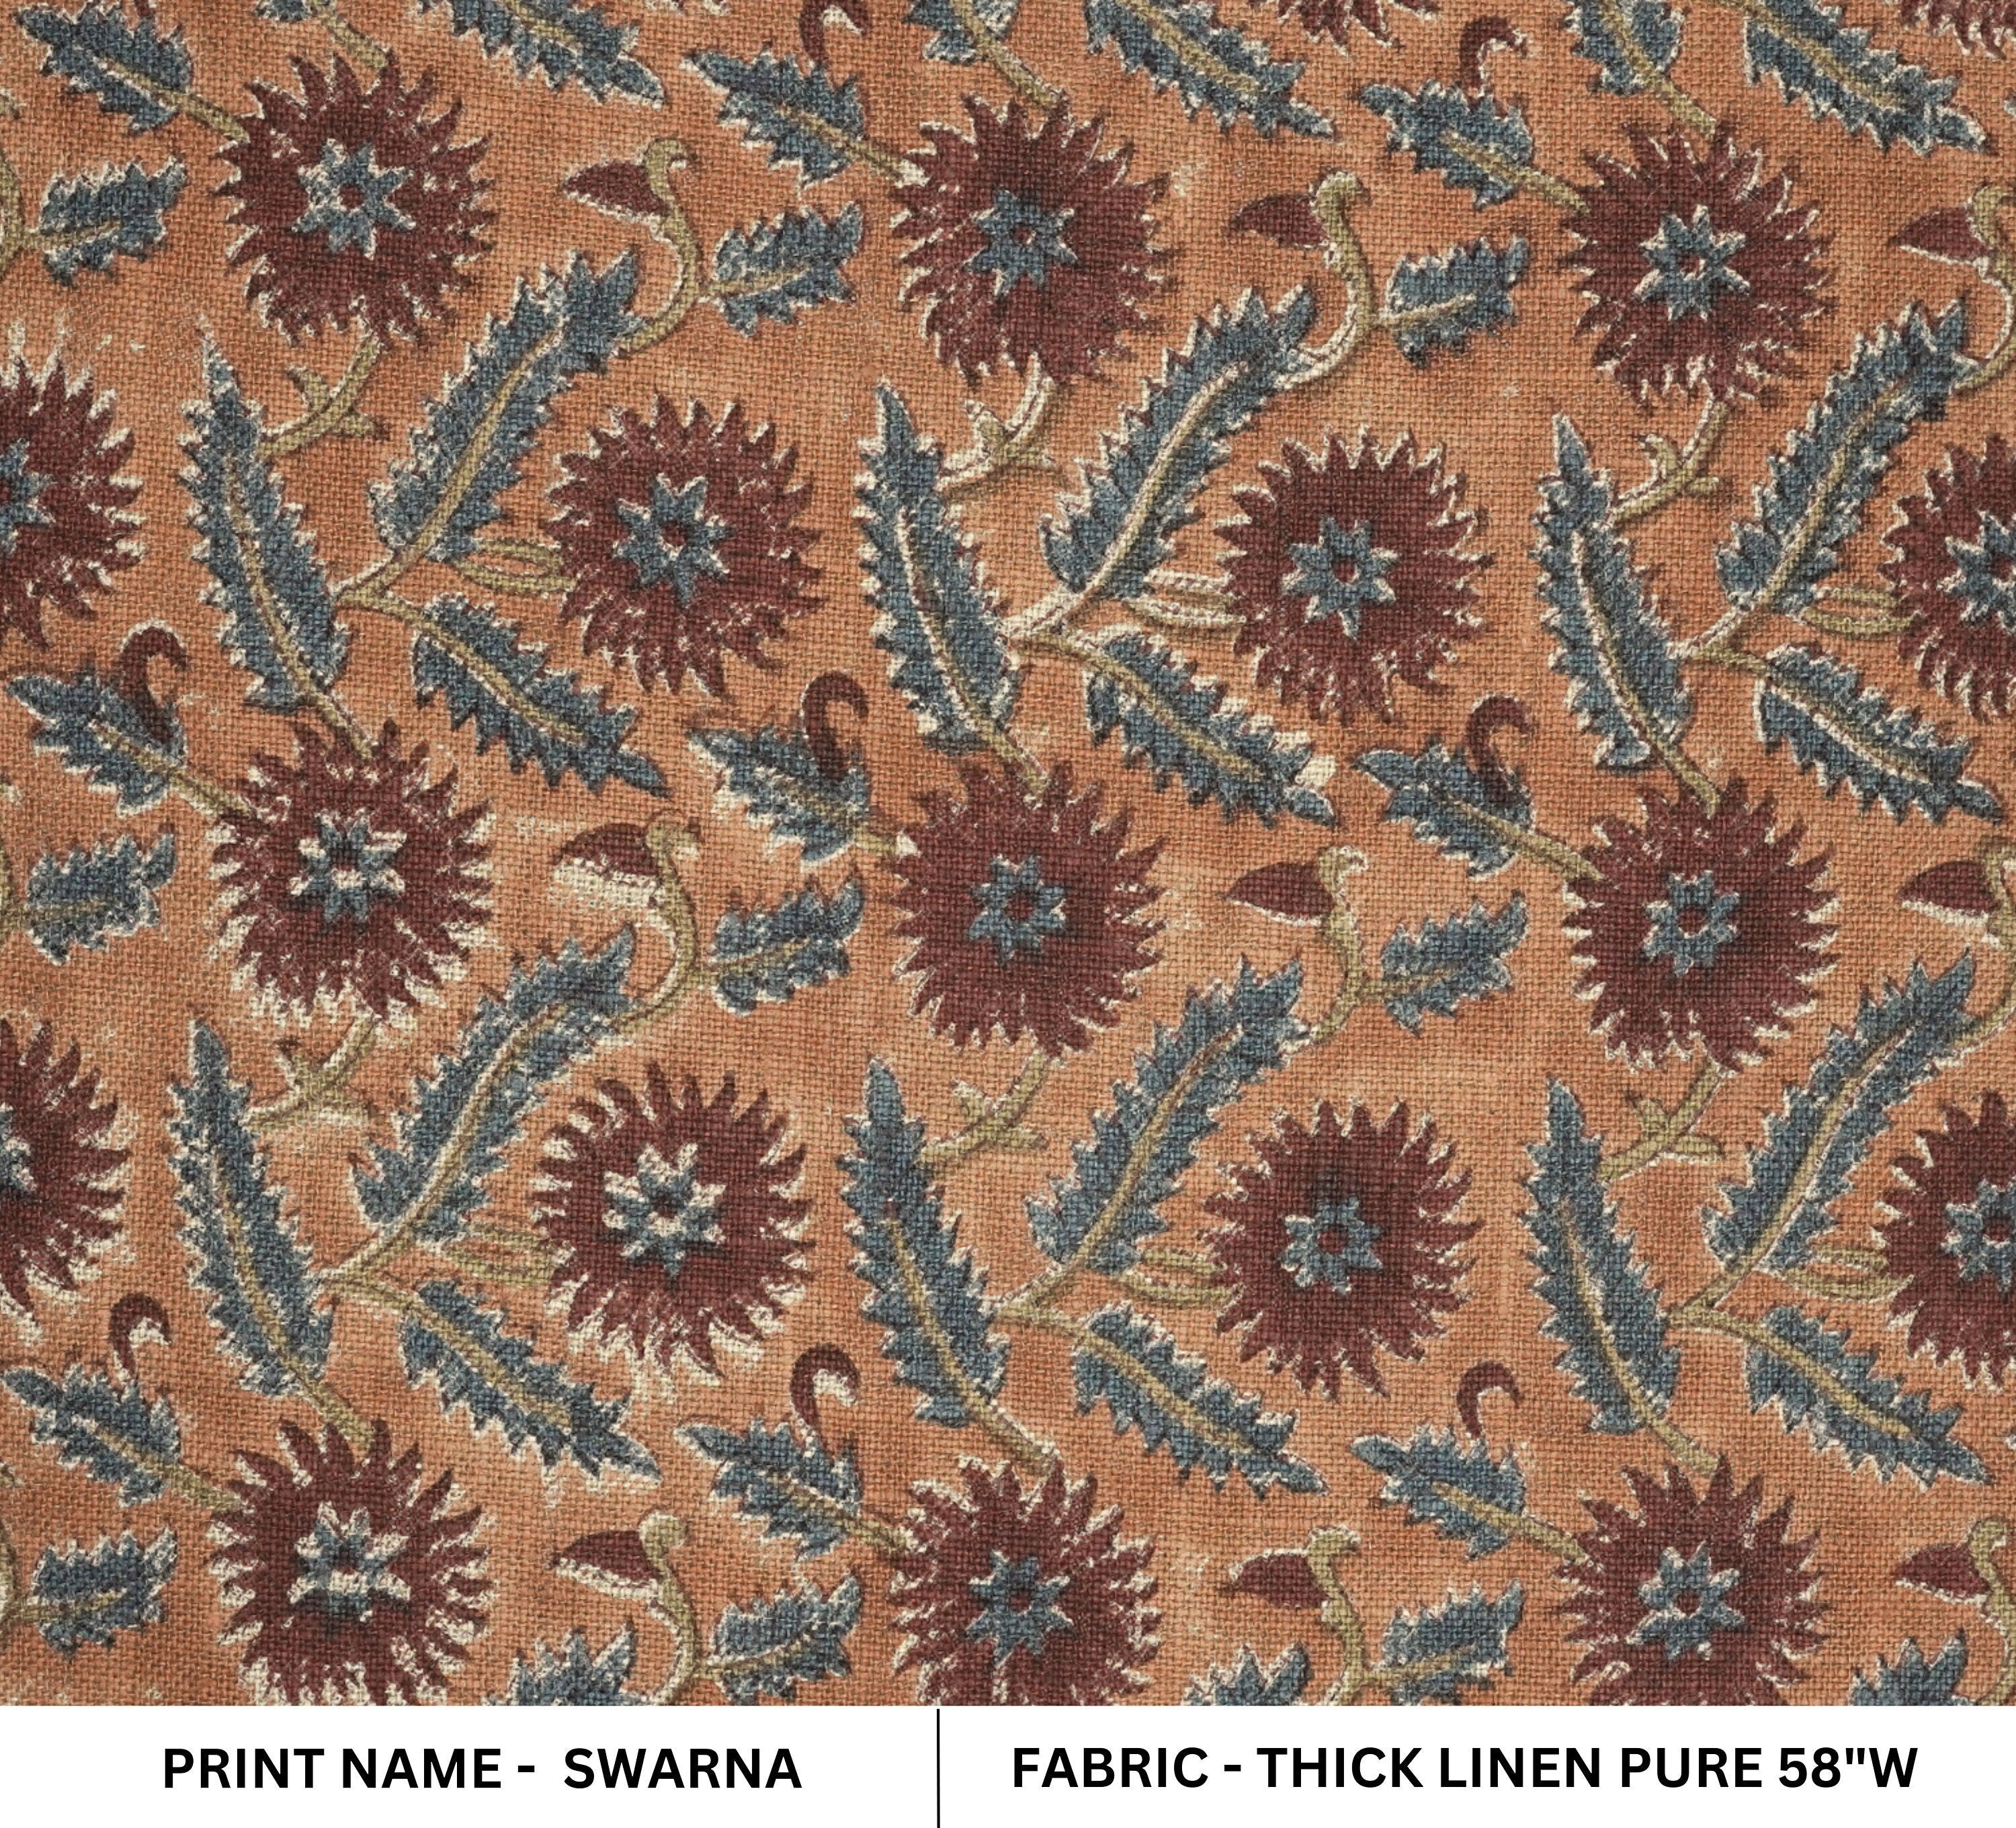 Upholstery drapery thick linen fabric for cushion covers, curtains, sofa cover, hand block print, floral handmade art - SWARNA